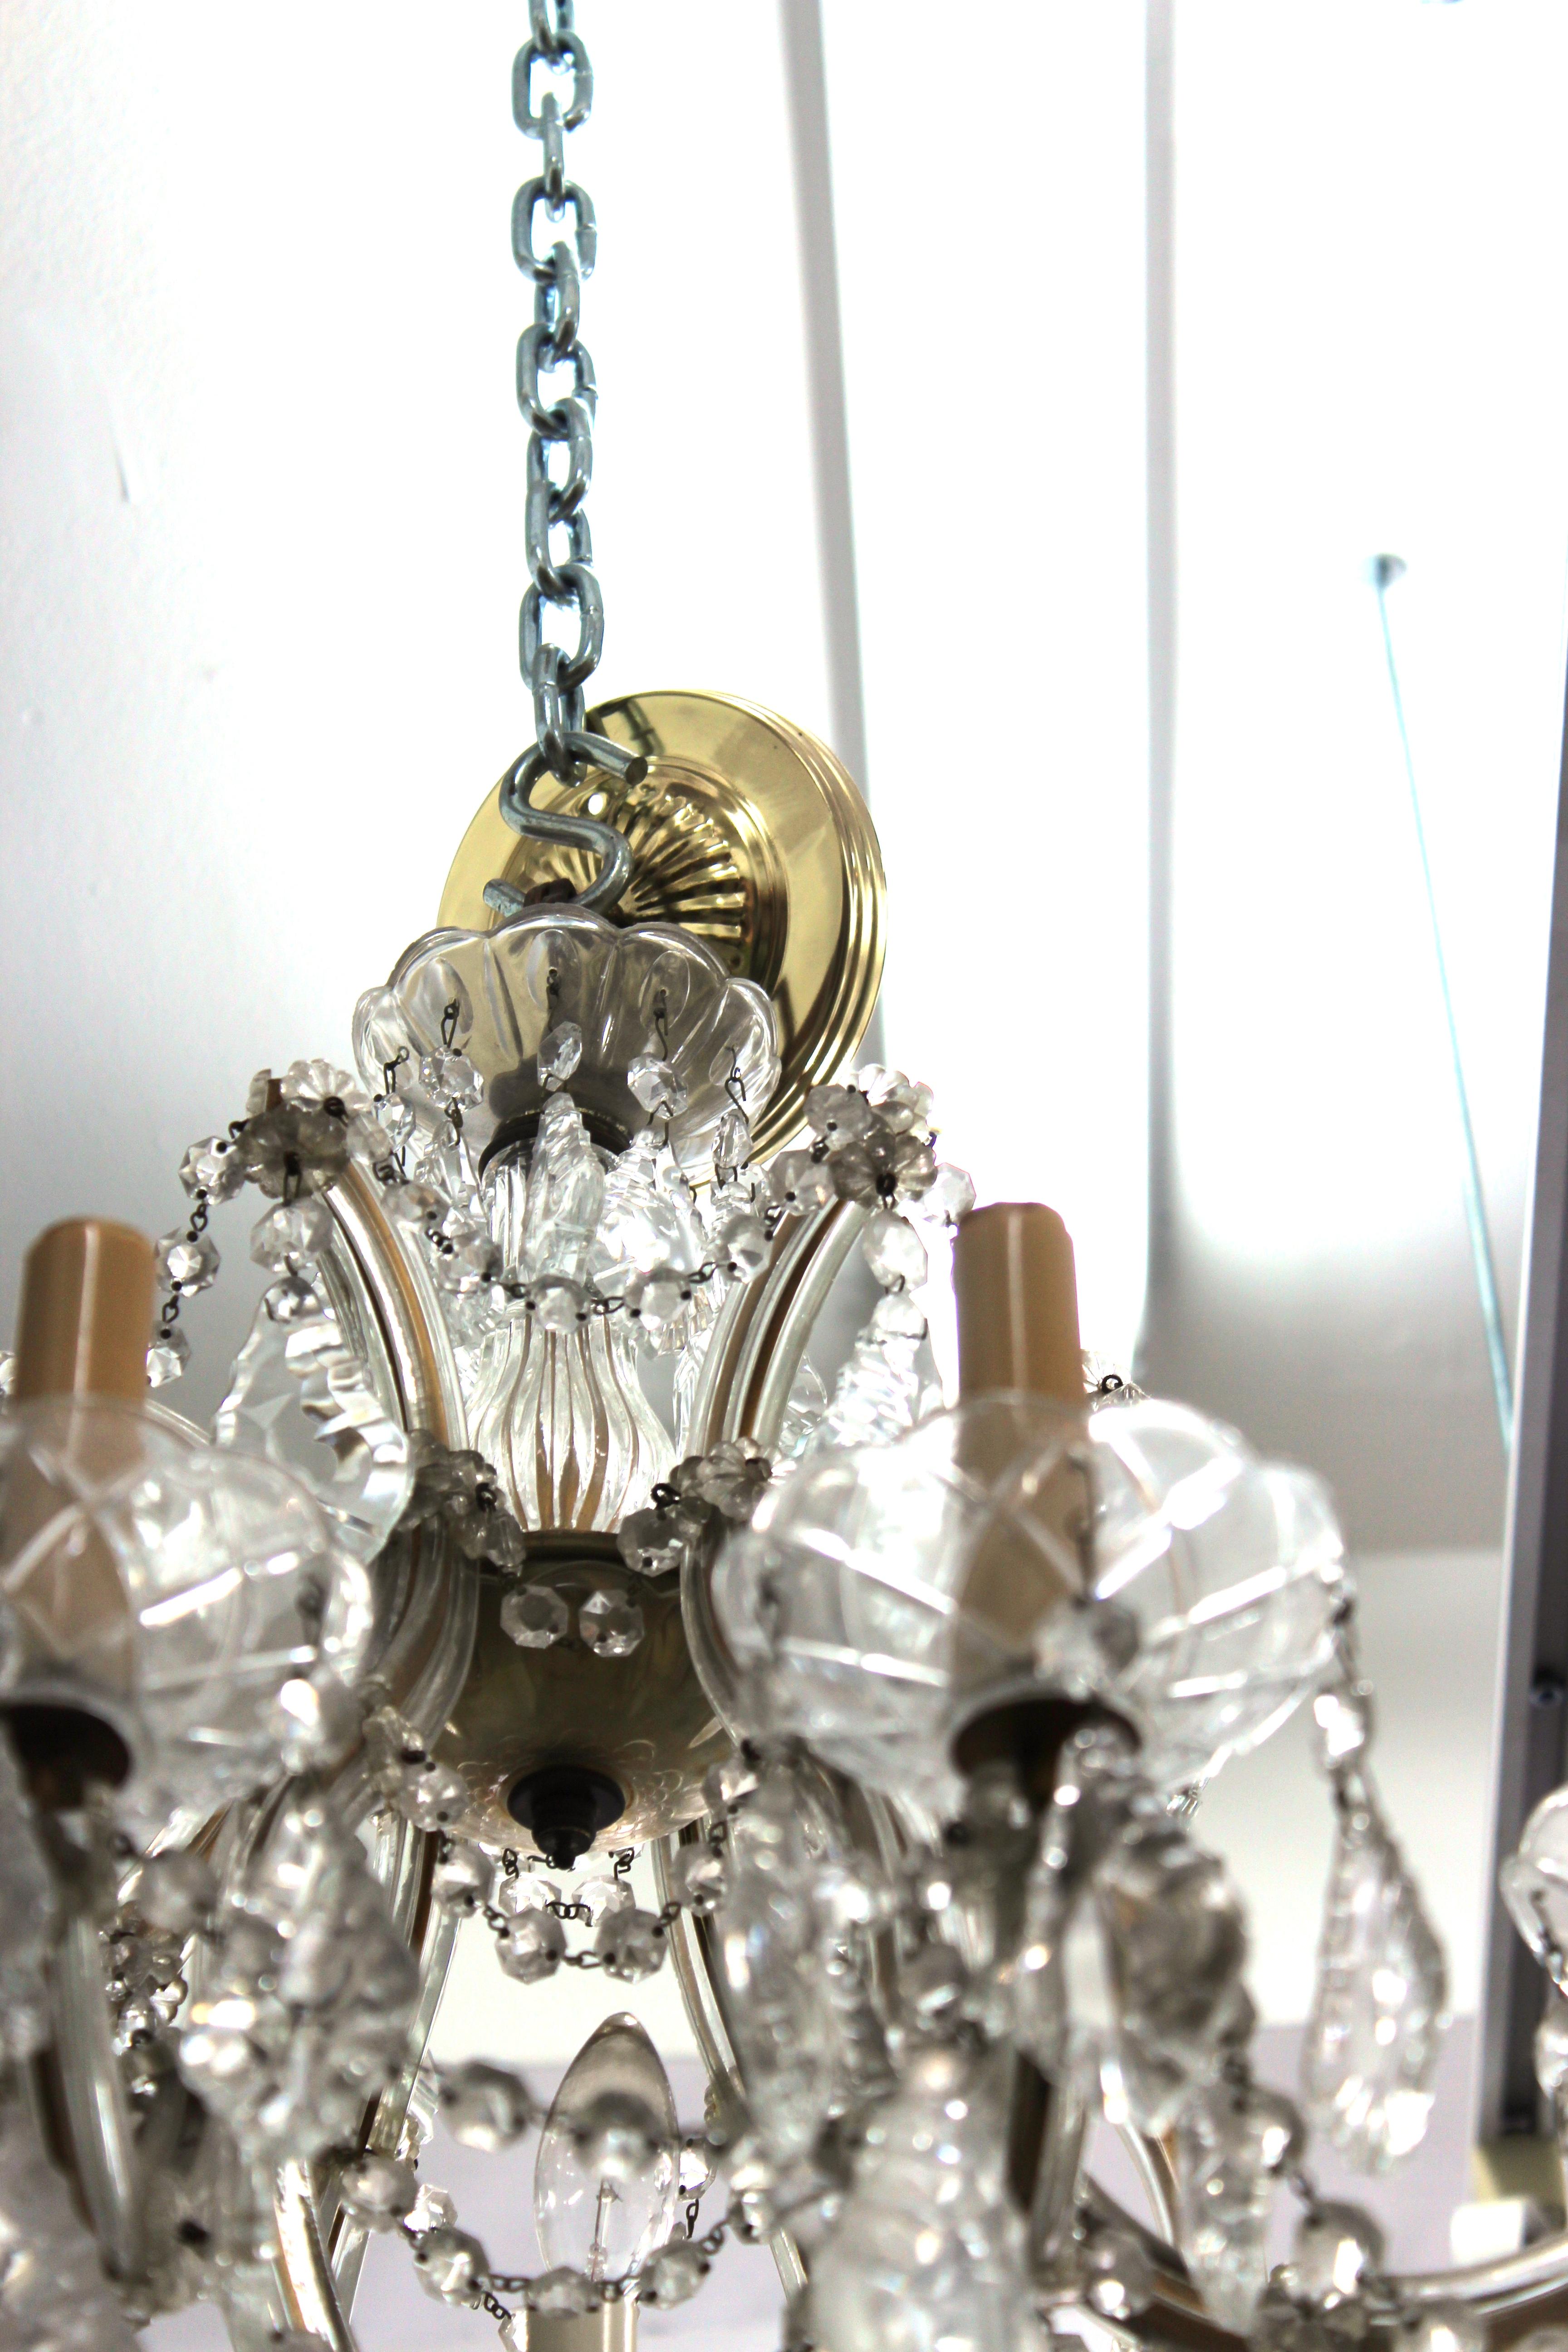 Chandelier with Twelve Arms and Crystal Ornaments 4